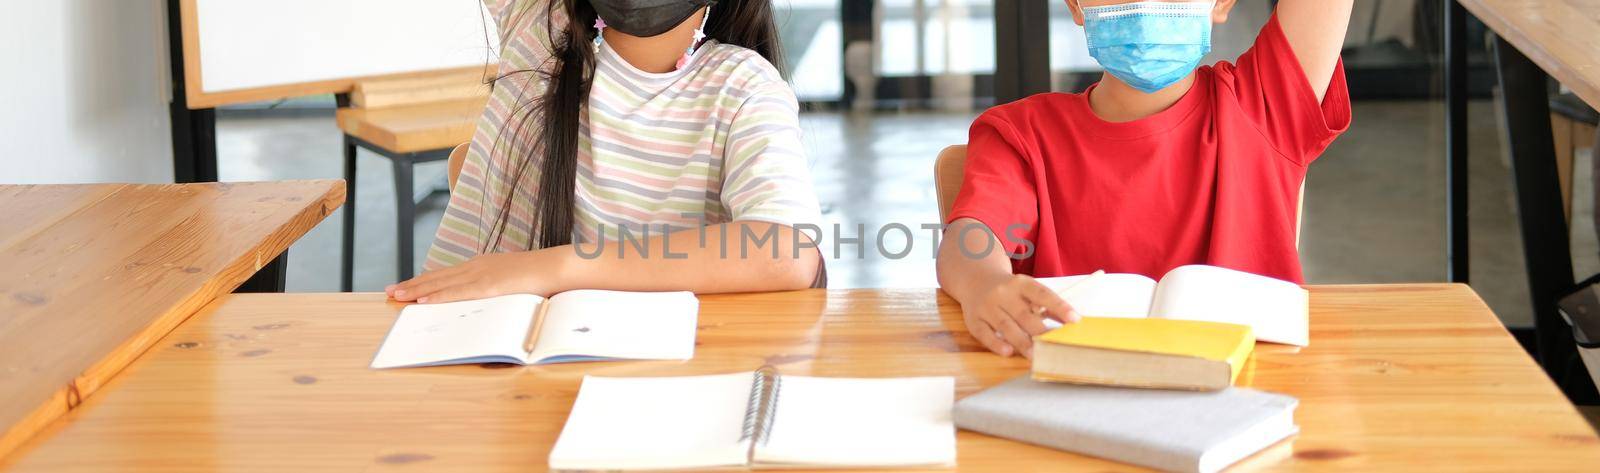 asian girl boy student wearing face mask studying raising hand in classroom. learning education at school